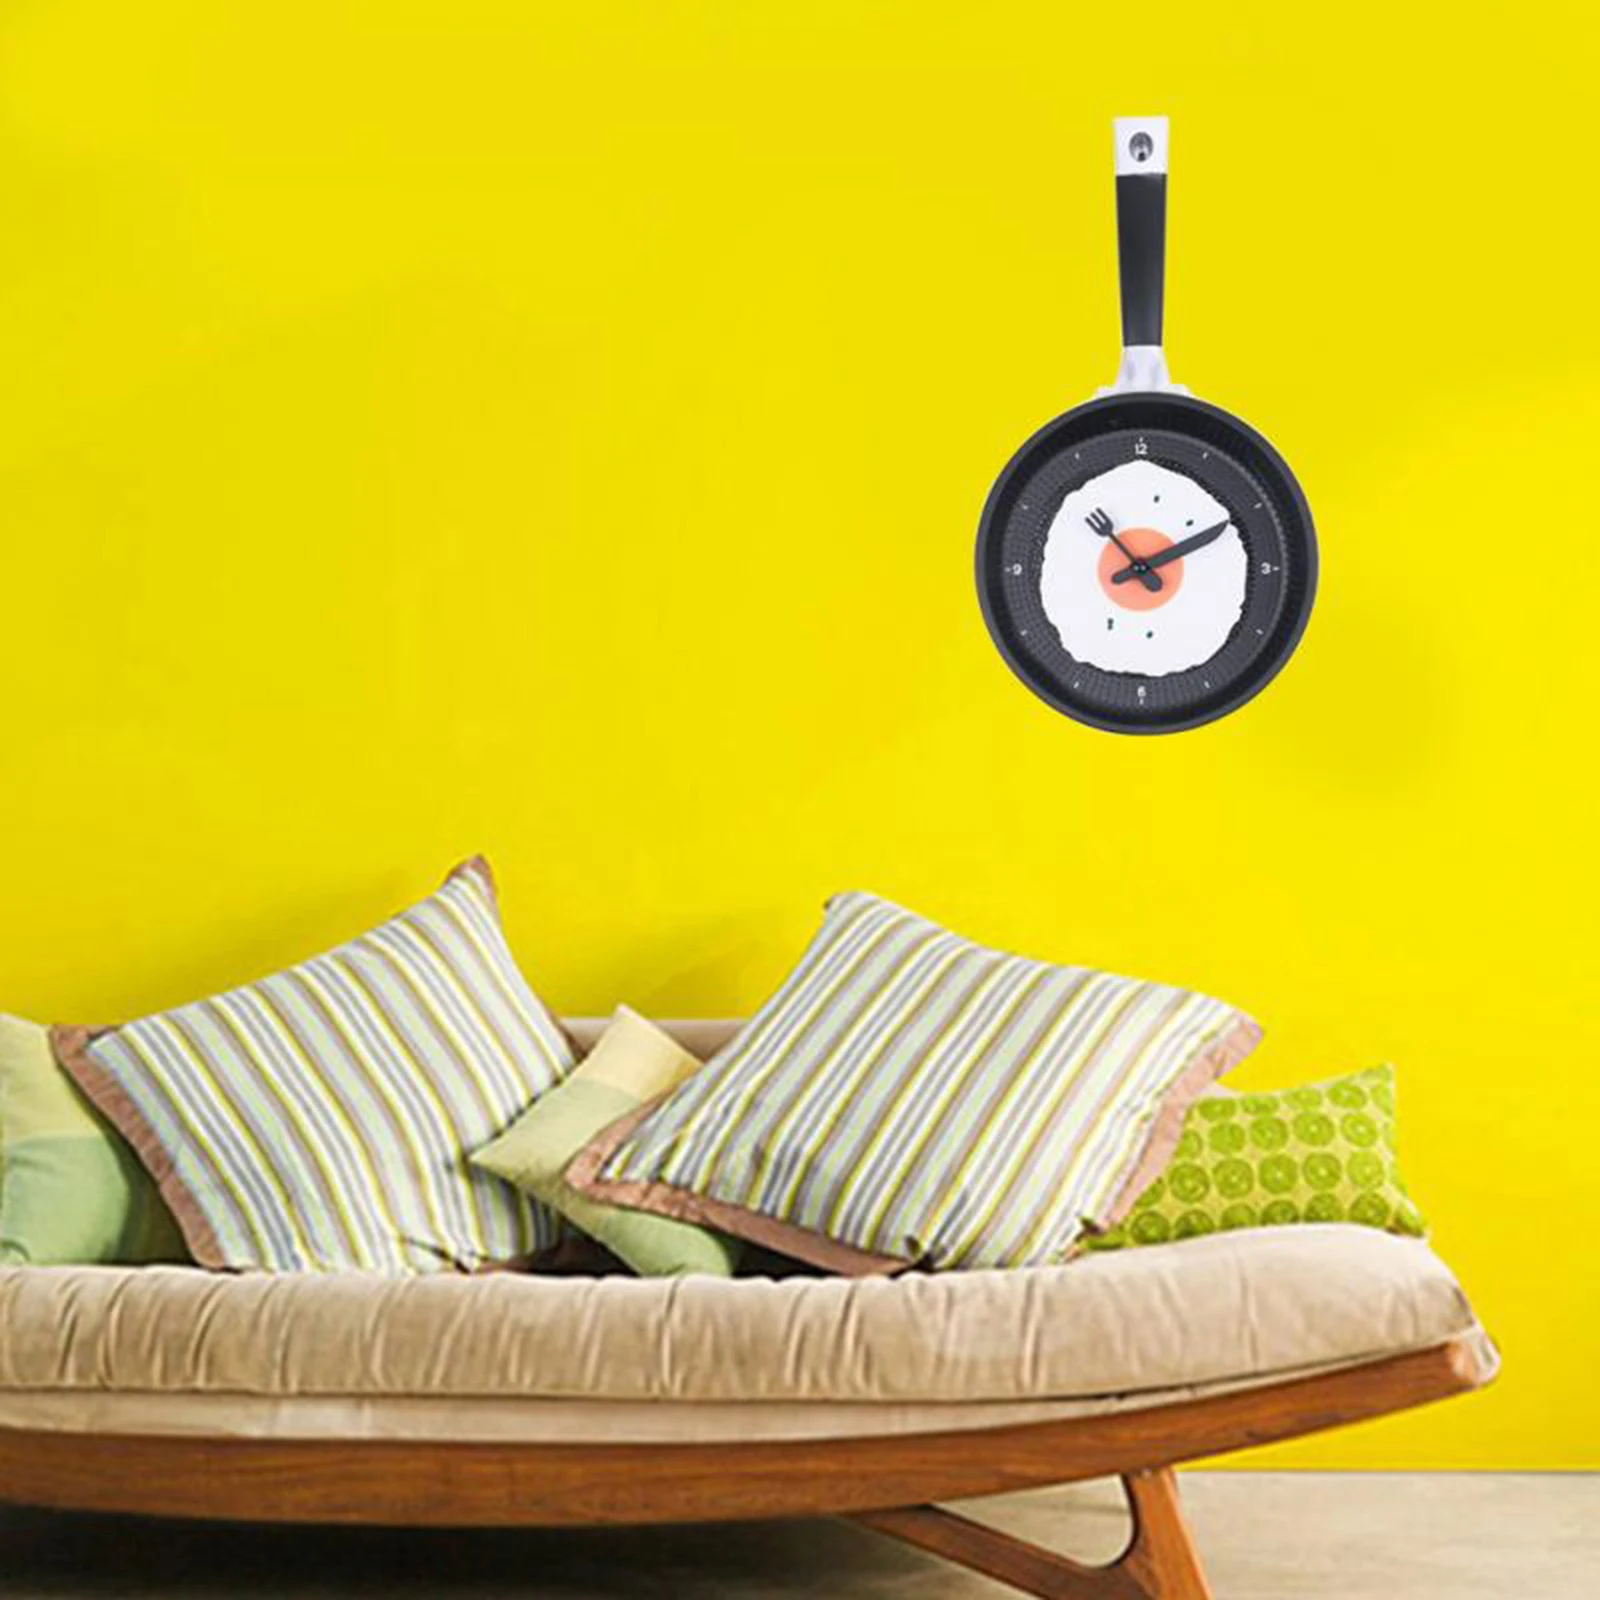 Frying Pan with Fried Egg Shaped Wall Clock Orange Back, Shabby Chic,Kitchen Themed Unique Wall Clock